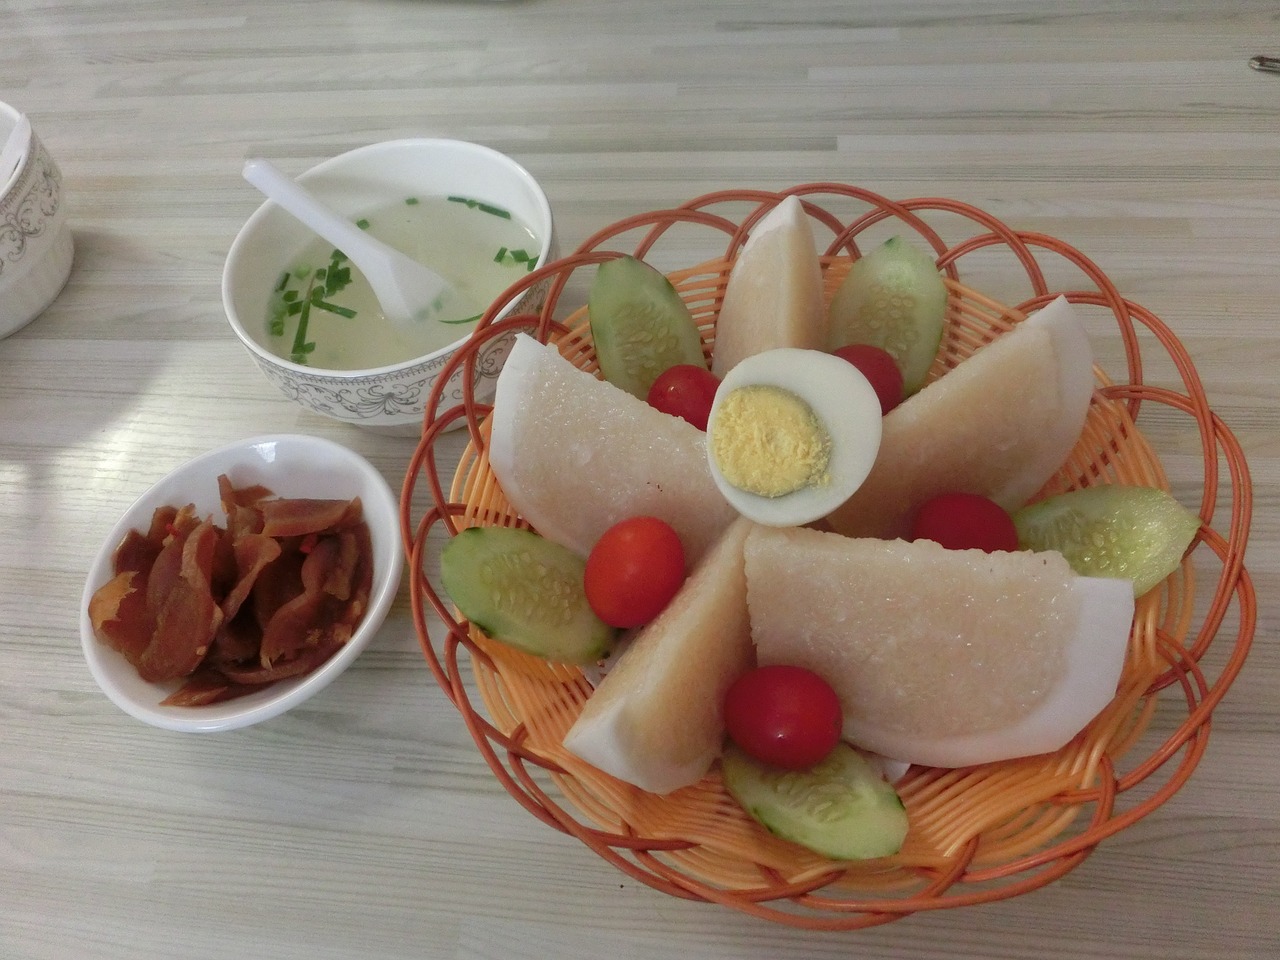 coconut food catering hainan snacks special foods free photo